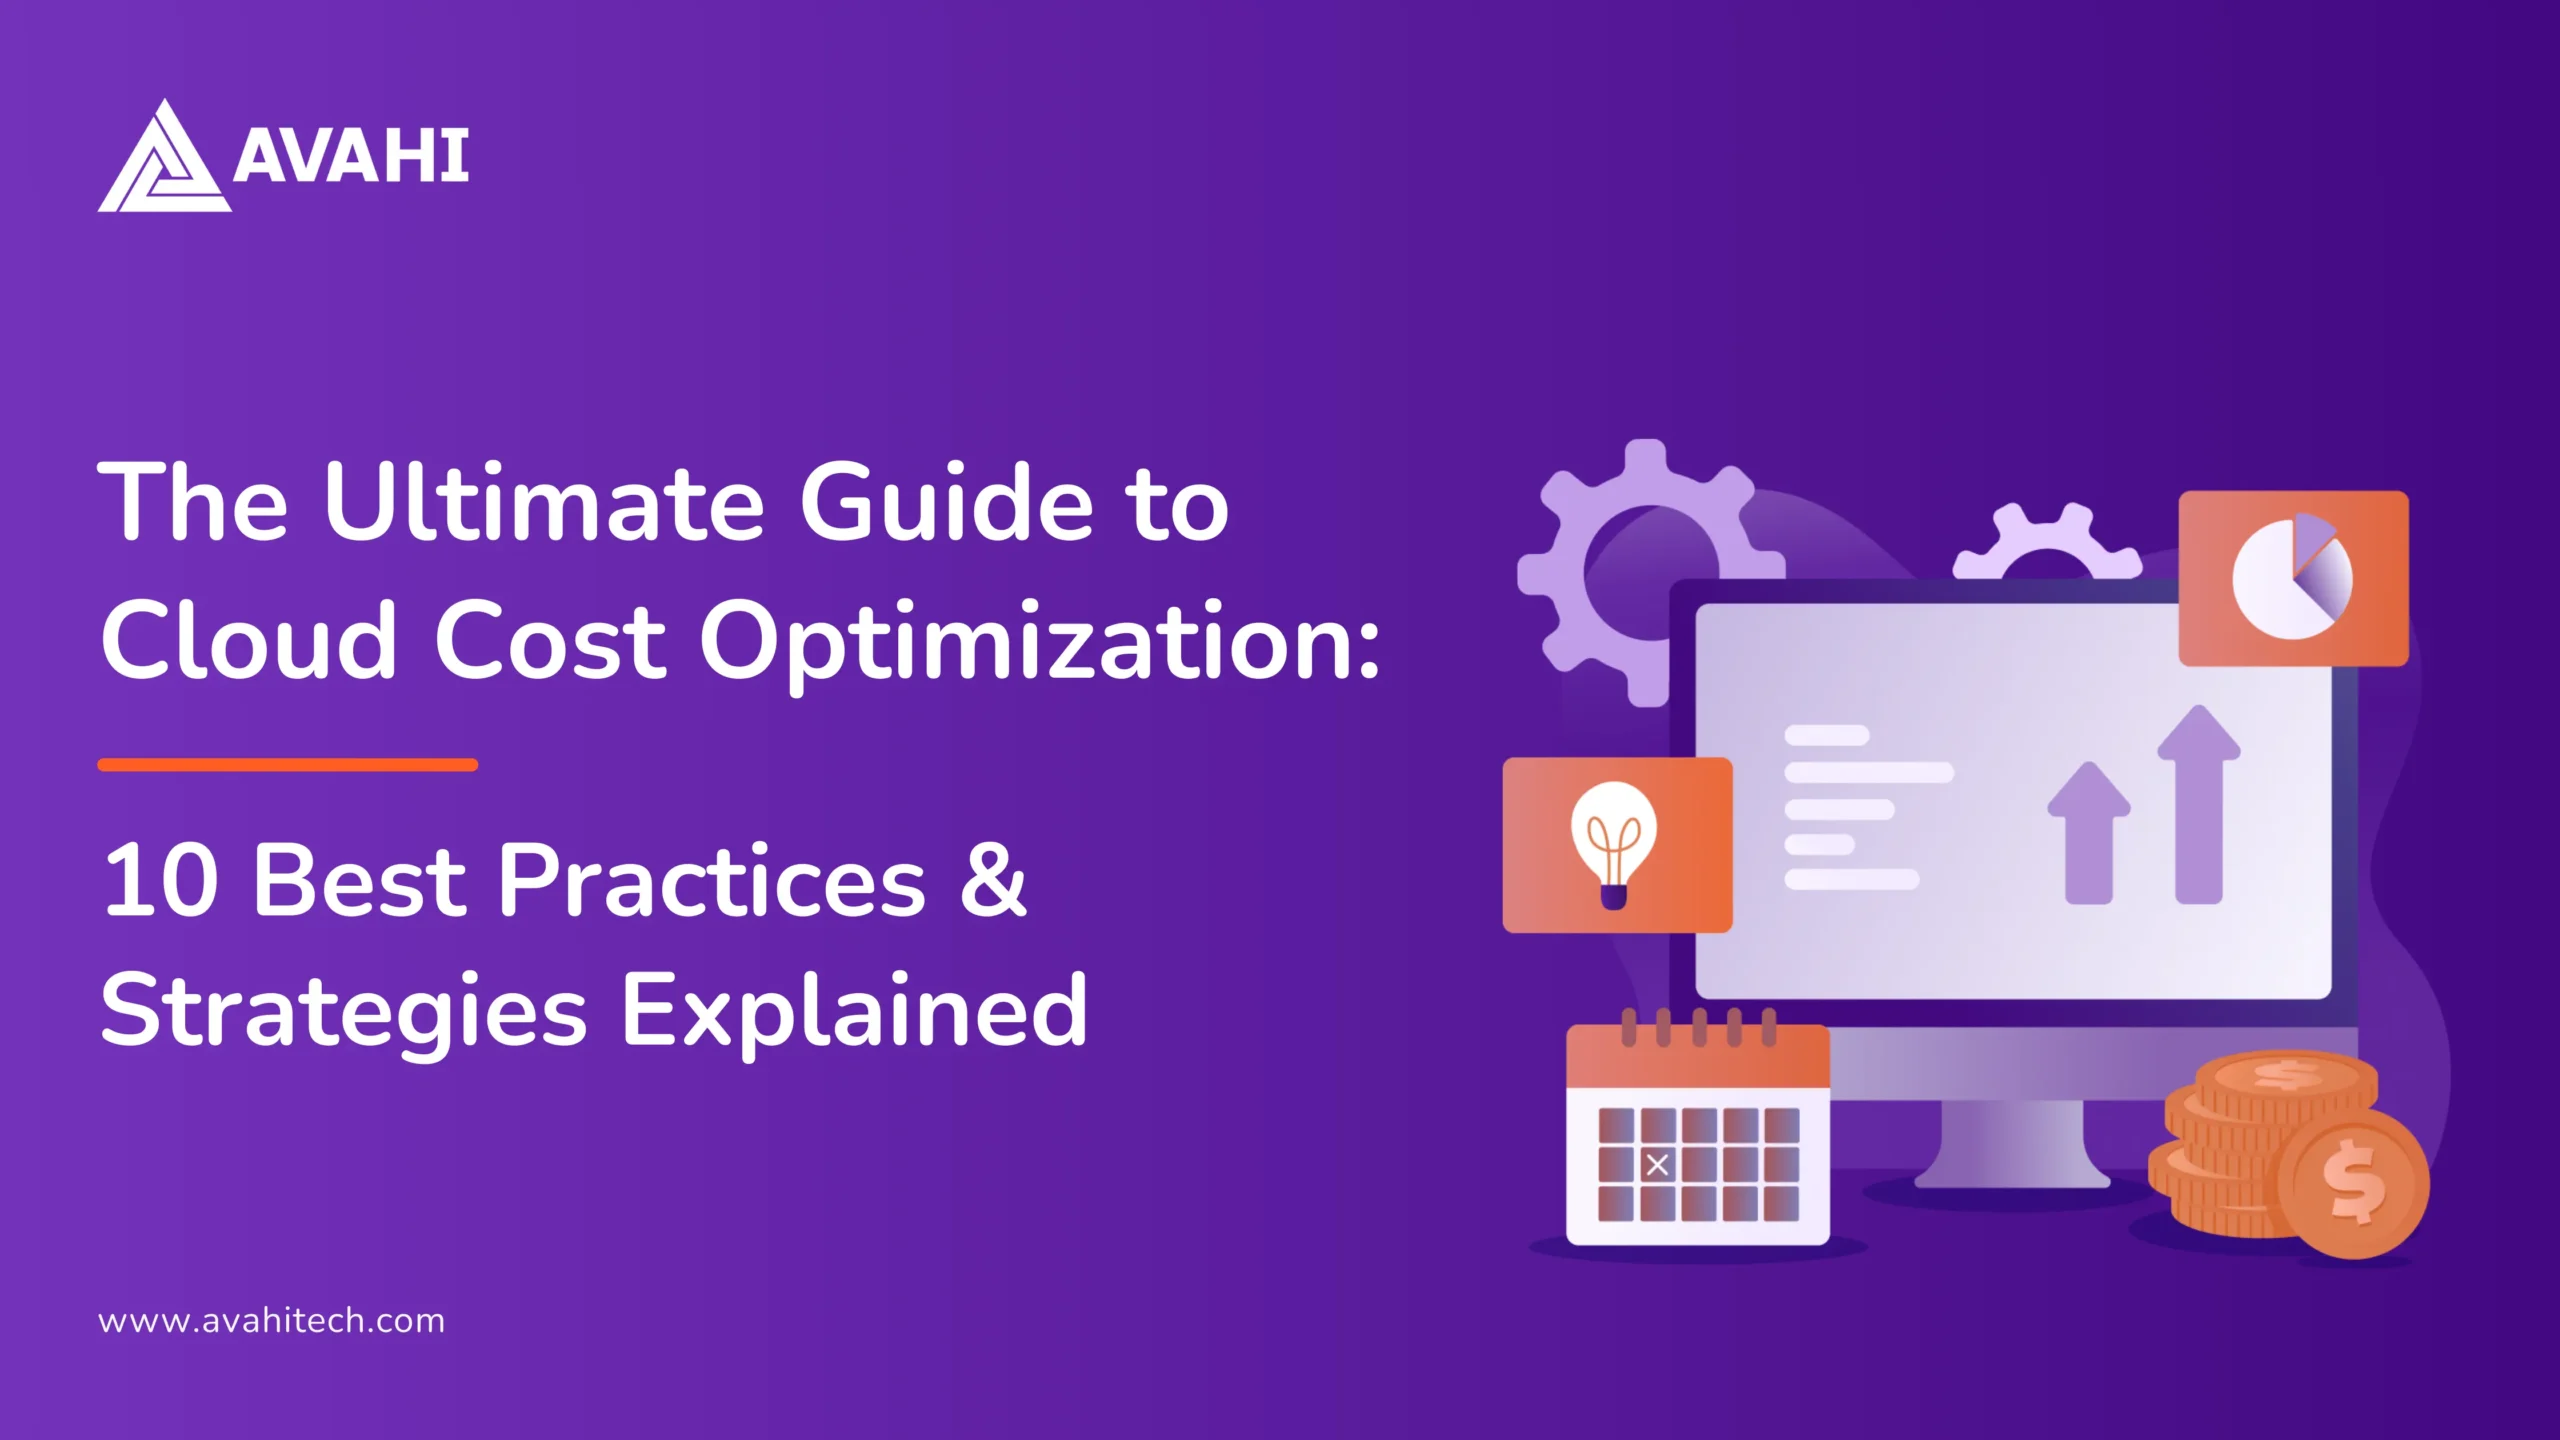 The Ultimate Guide to Cloud Cost Optimization 10 Best Practices & Strategies Explained